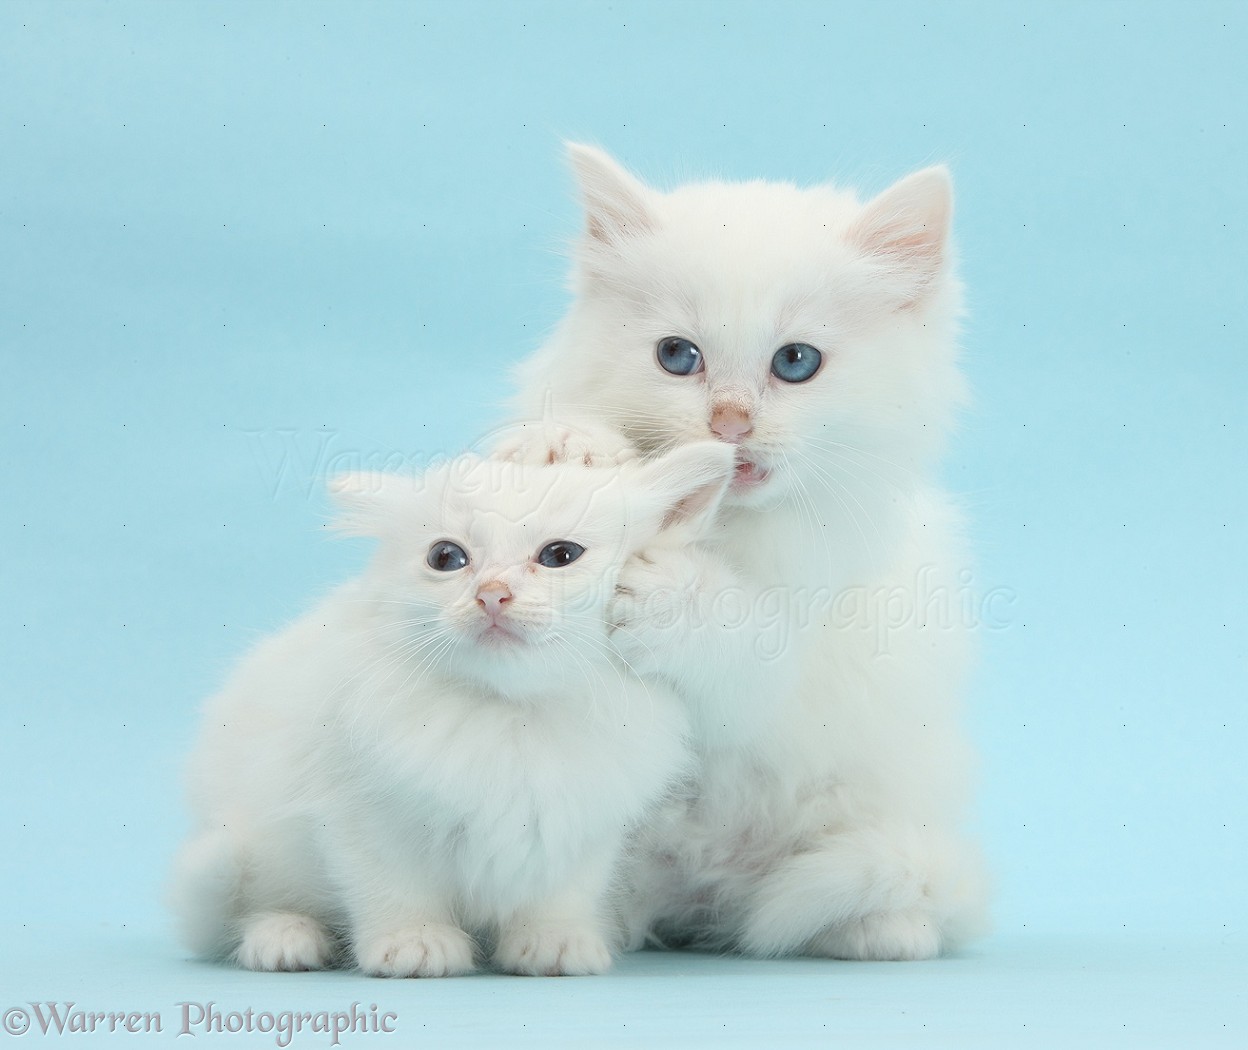 White Maine Coon Kittens